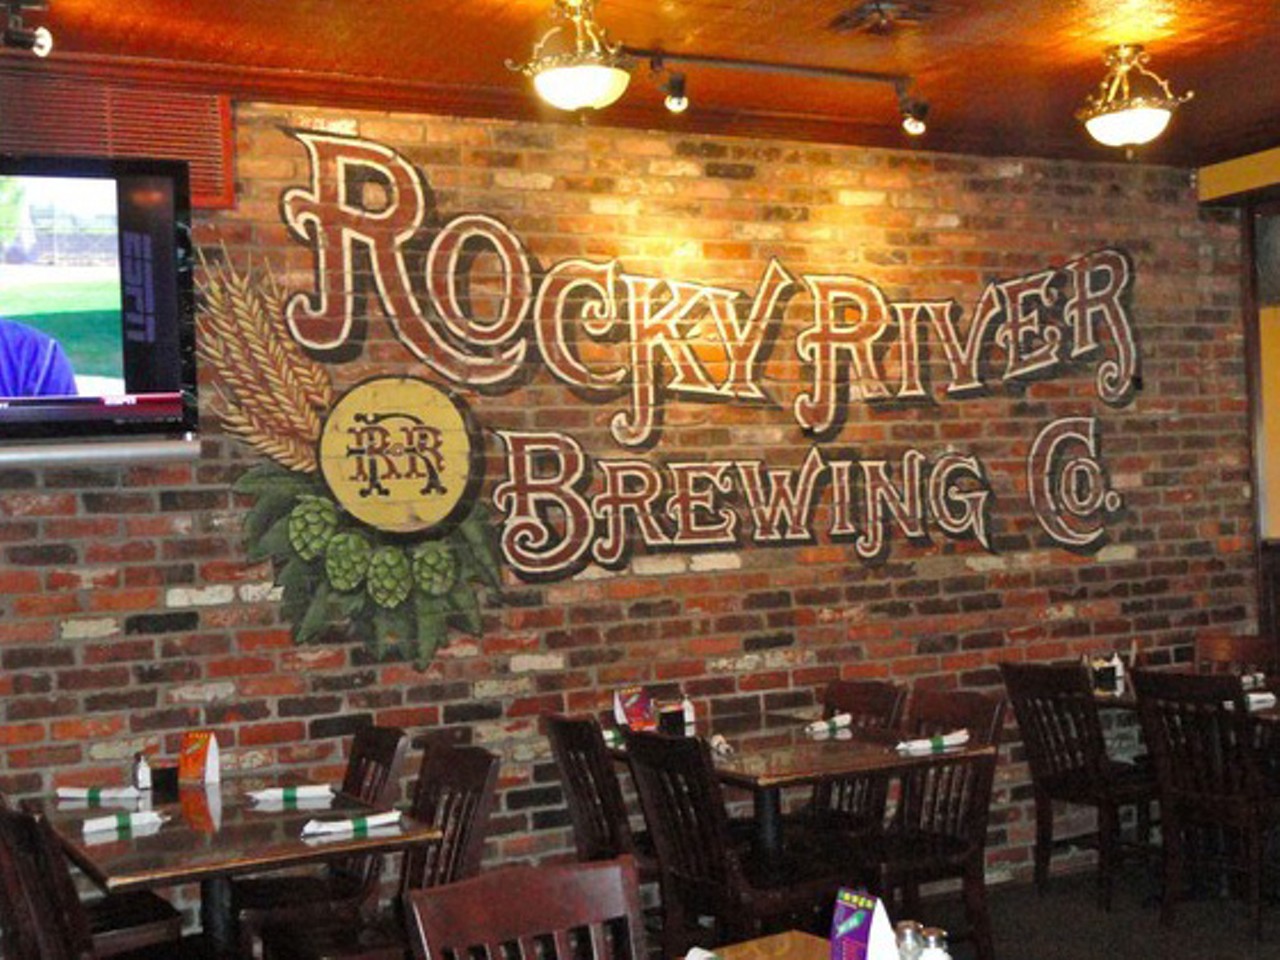 Rocky River Brewing Company
21290 Center Ridge Rd., Rocky River
Every Friday during Lent hit up the Rocky River Brewing Company for their fried cod with golden fries and creamy coleslaw. Pair it with one of their own craft beers like the Pirate Light Blond Ale. The quality is clean and the space is bigger than an NBA court. 
Photo via Rocky River Brewing Company